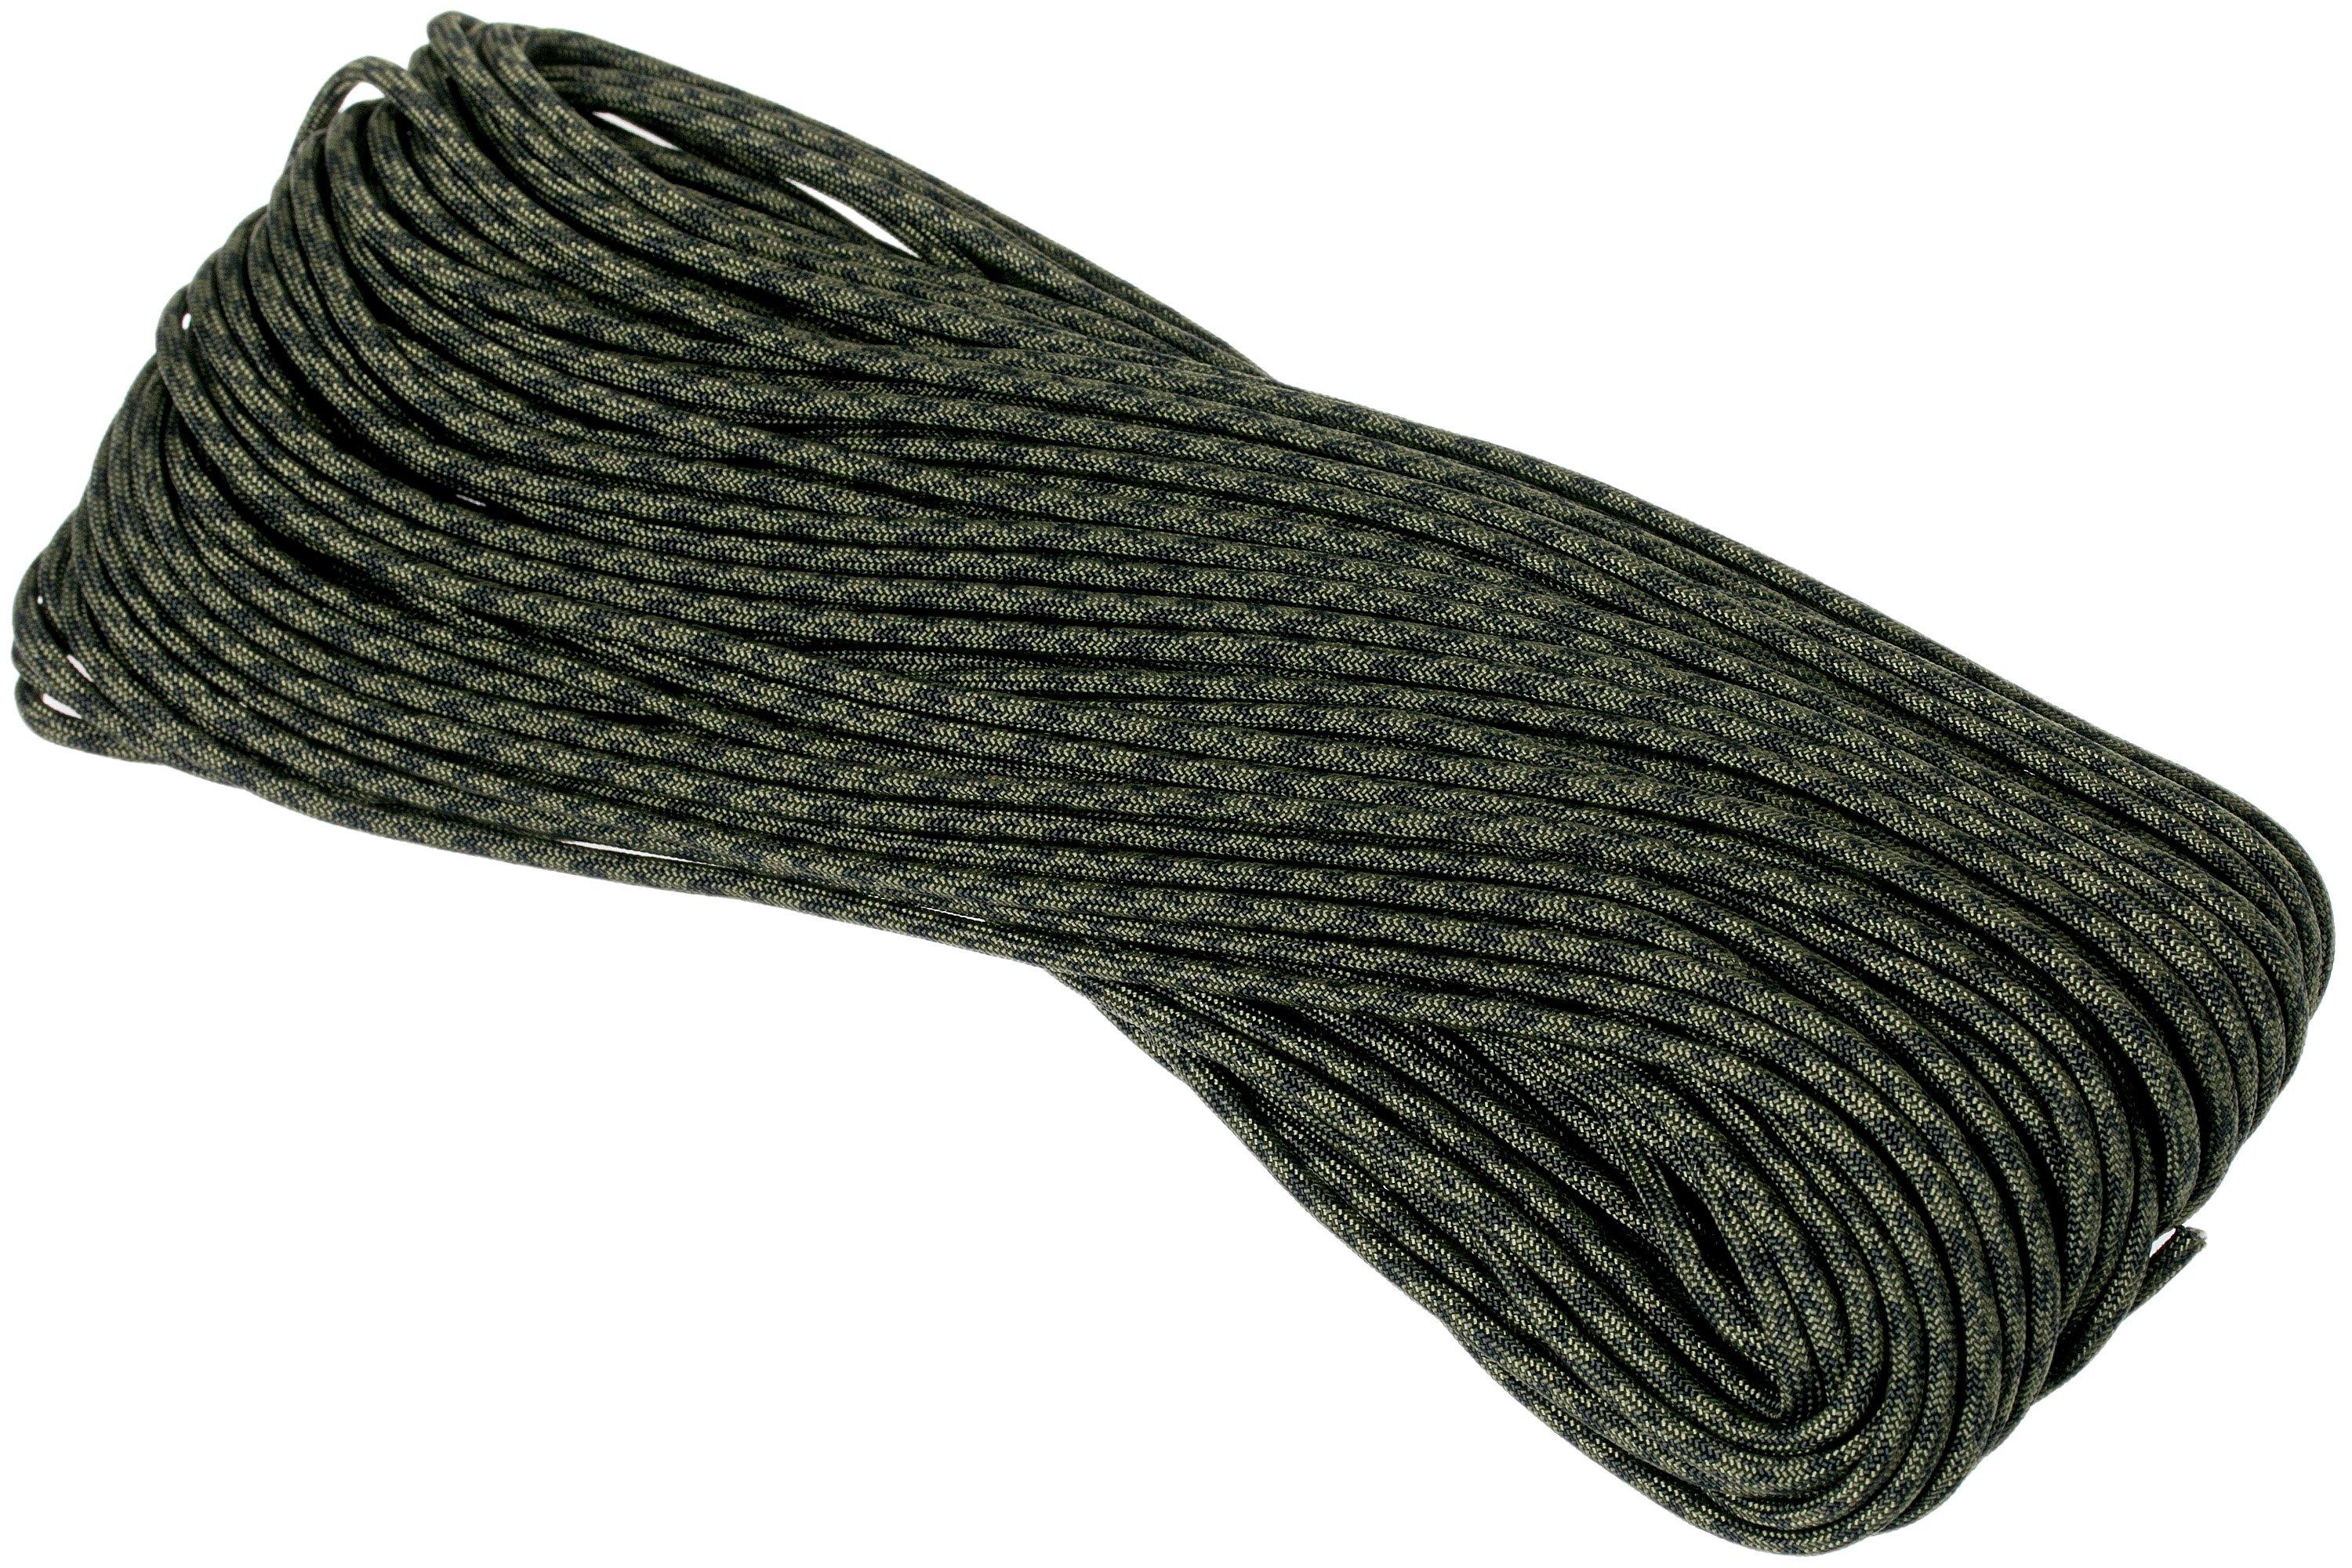 No 1. Paracord and Coloured rope shop in EU!